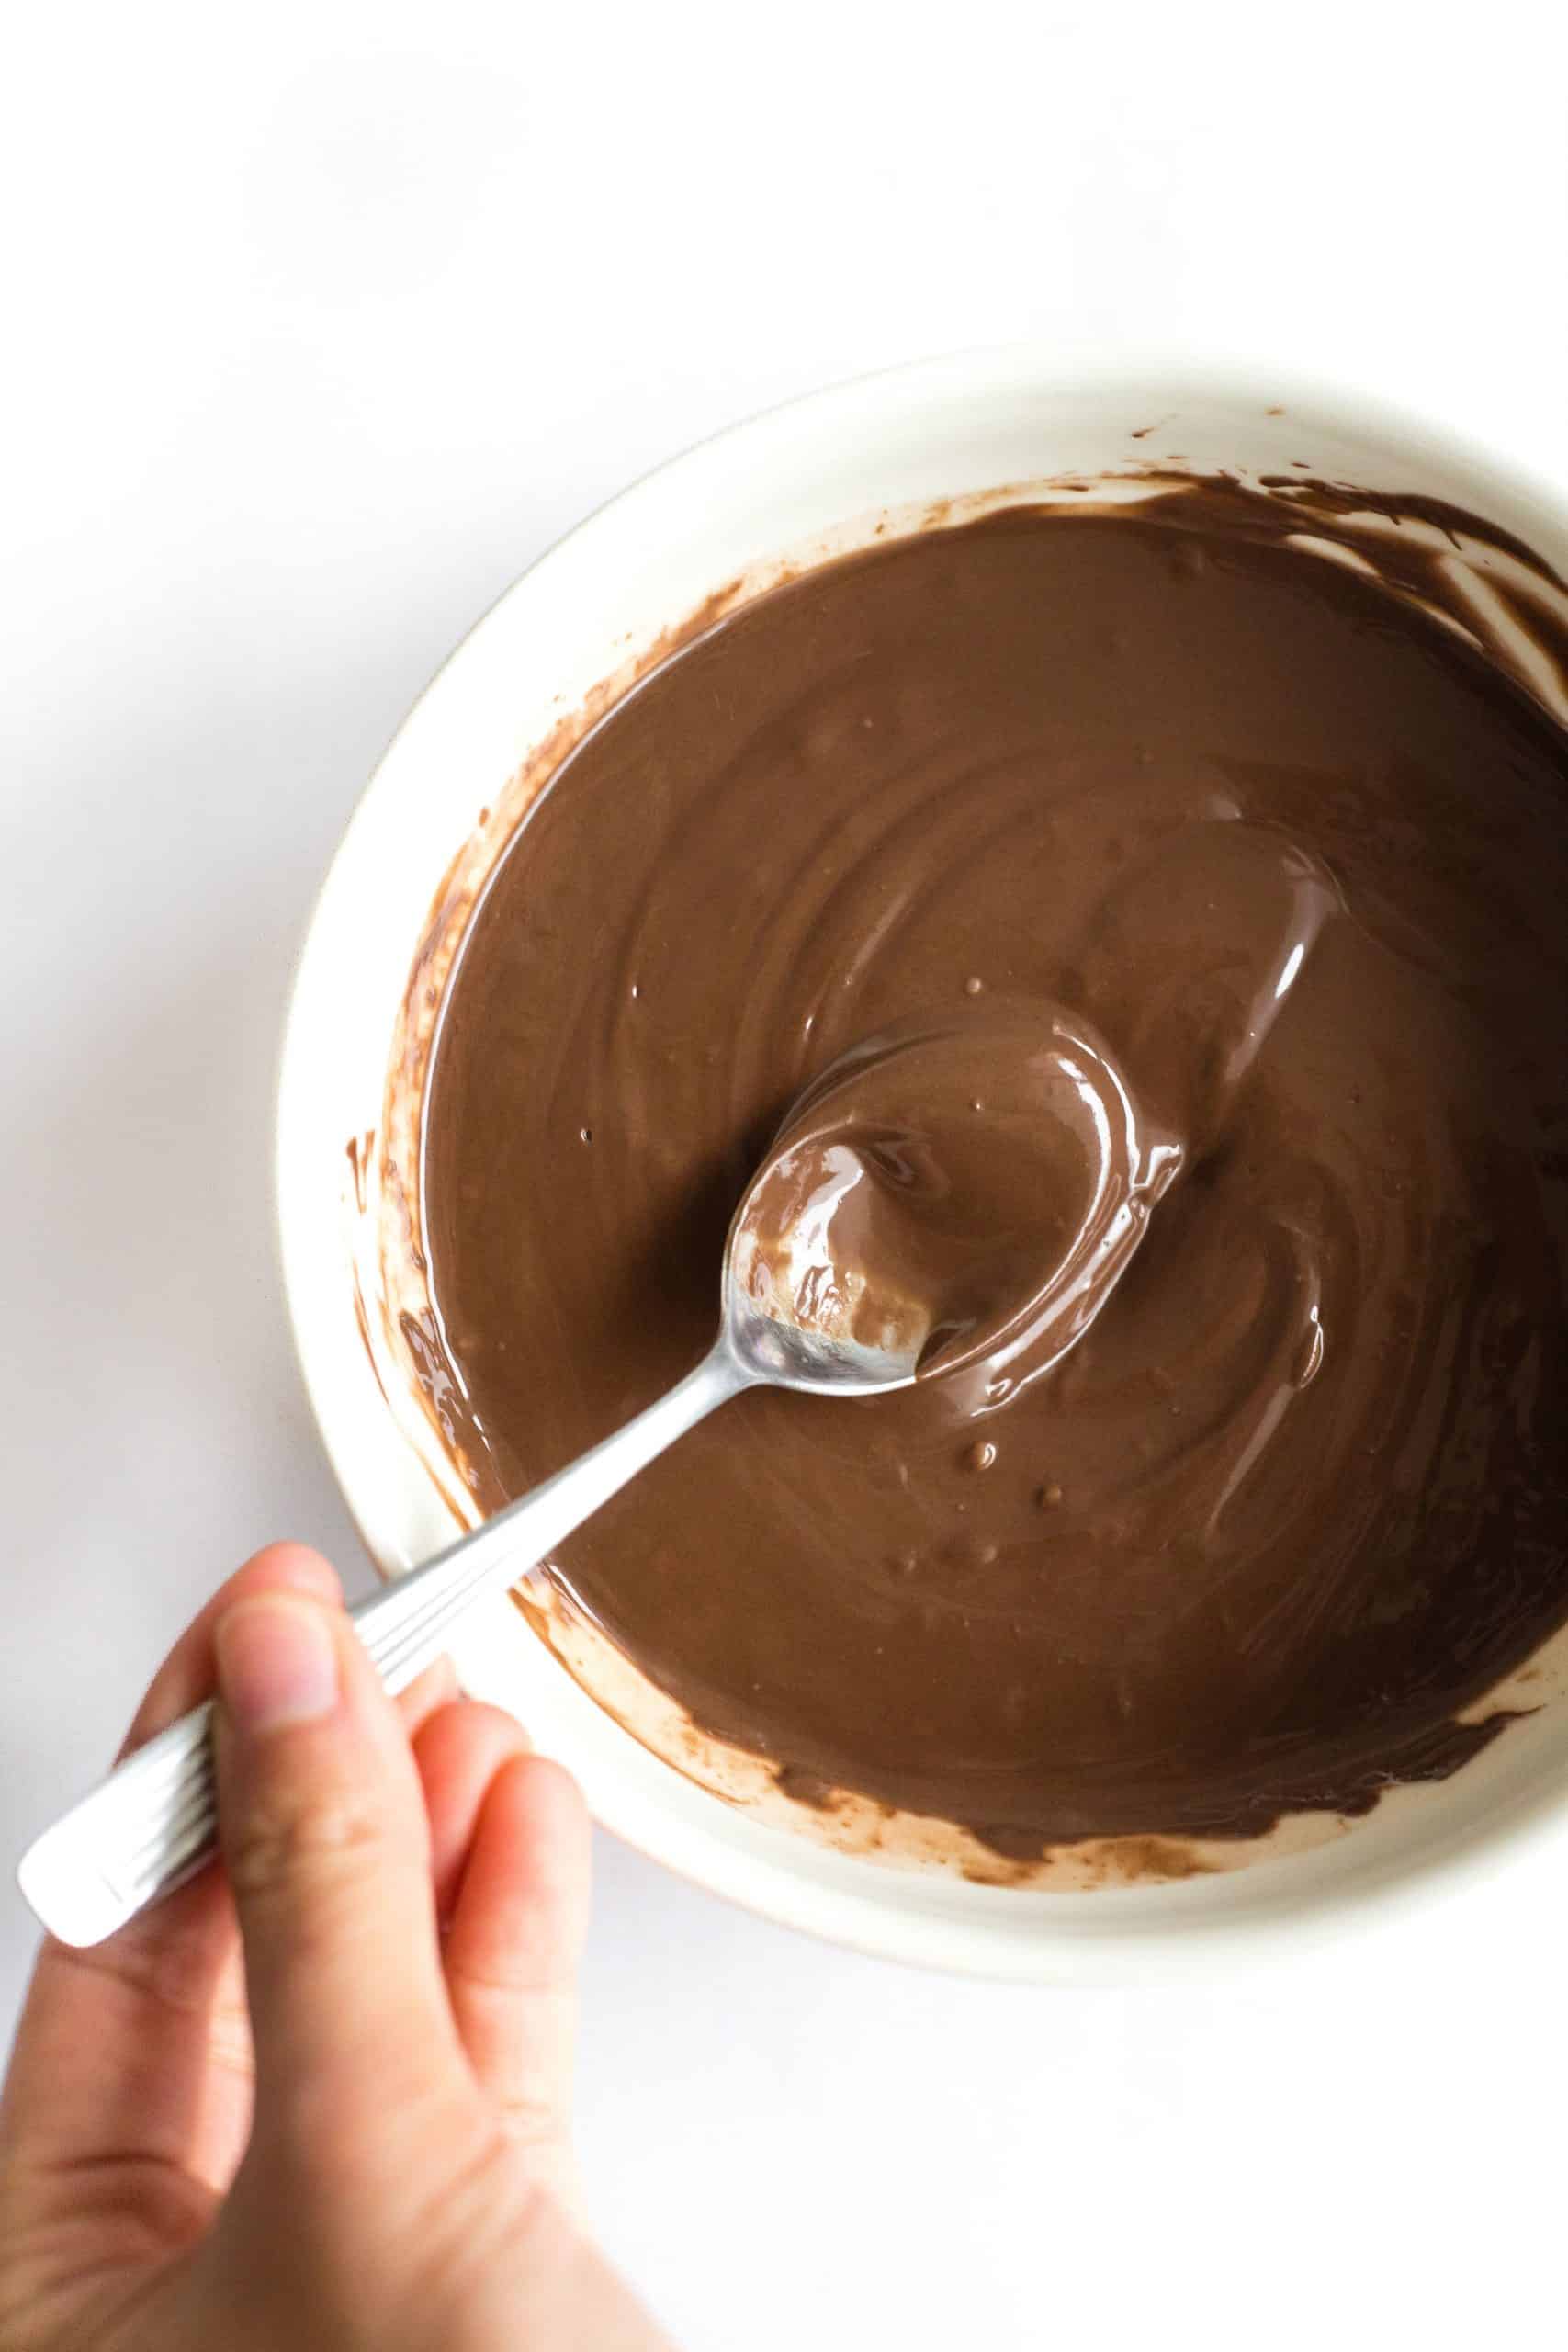 Mixing a bowl of melted chocolate with a metal spoon.